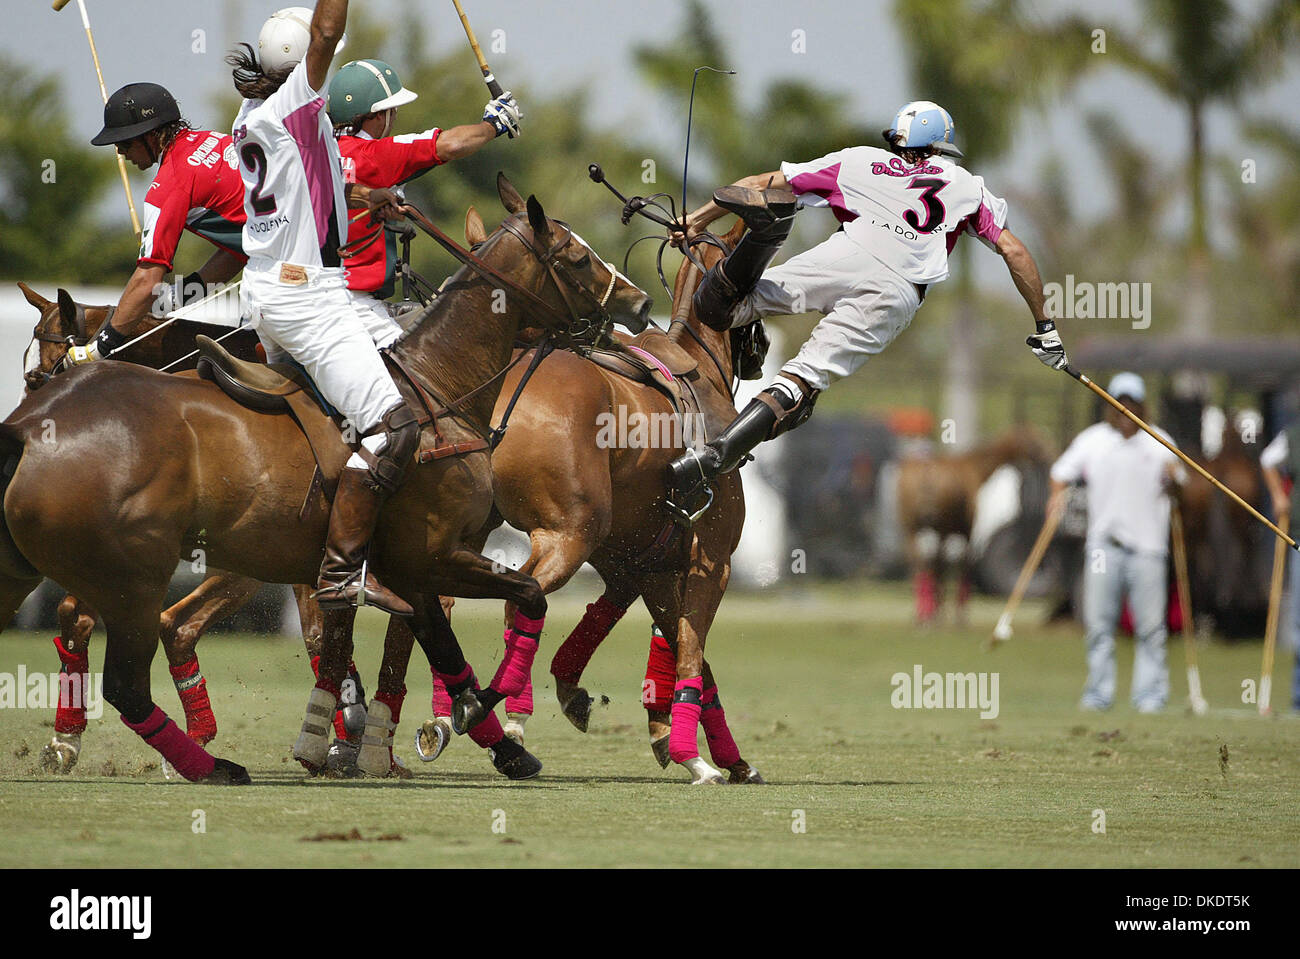 Apr 19, 2007 - Wellington, FL, USA - Crab Orchard's #3 ADOLFO CAMBIASO  takes a tumble playing against Orchard Hill. He was unhurt. Stanford U.S.  Open semifinal polo match between Orchard Hill